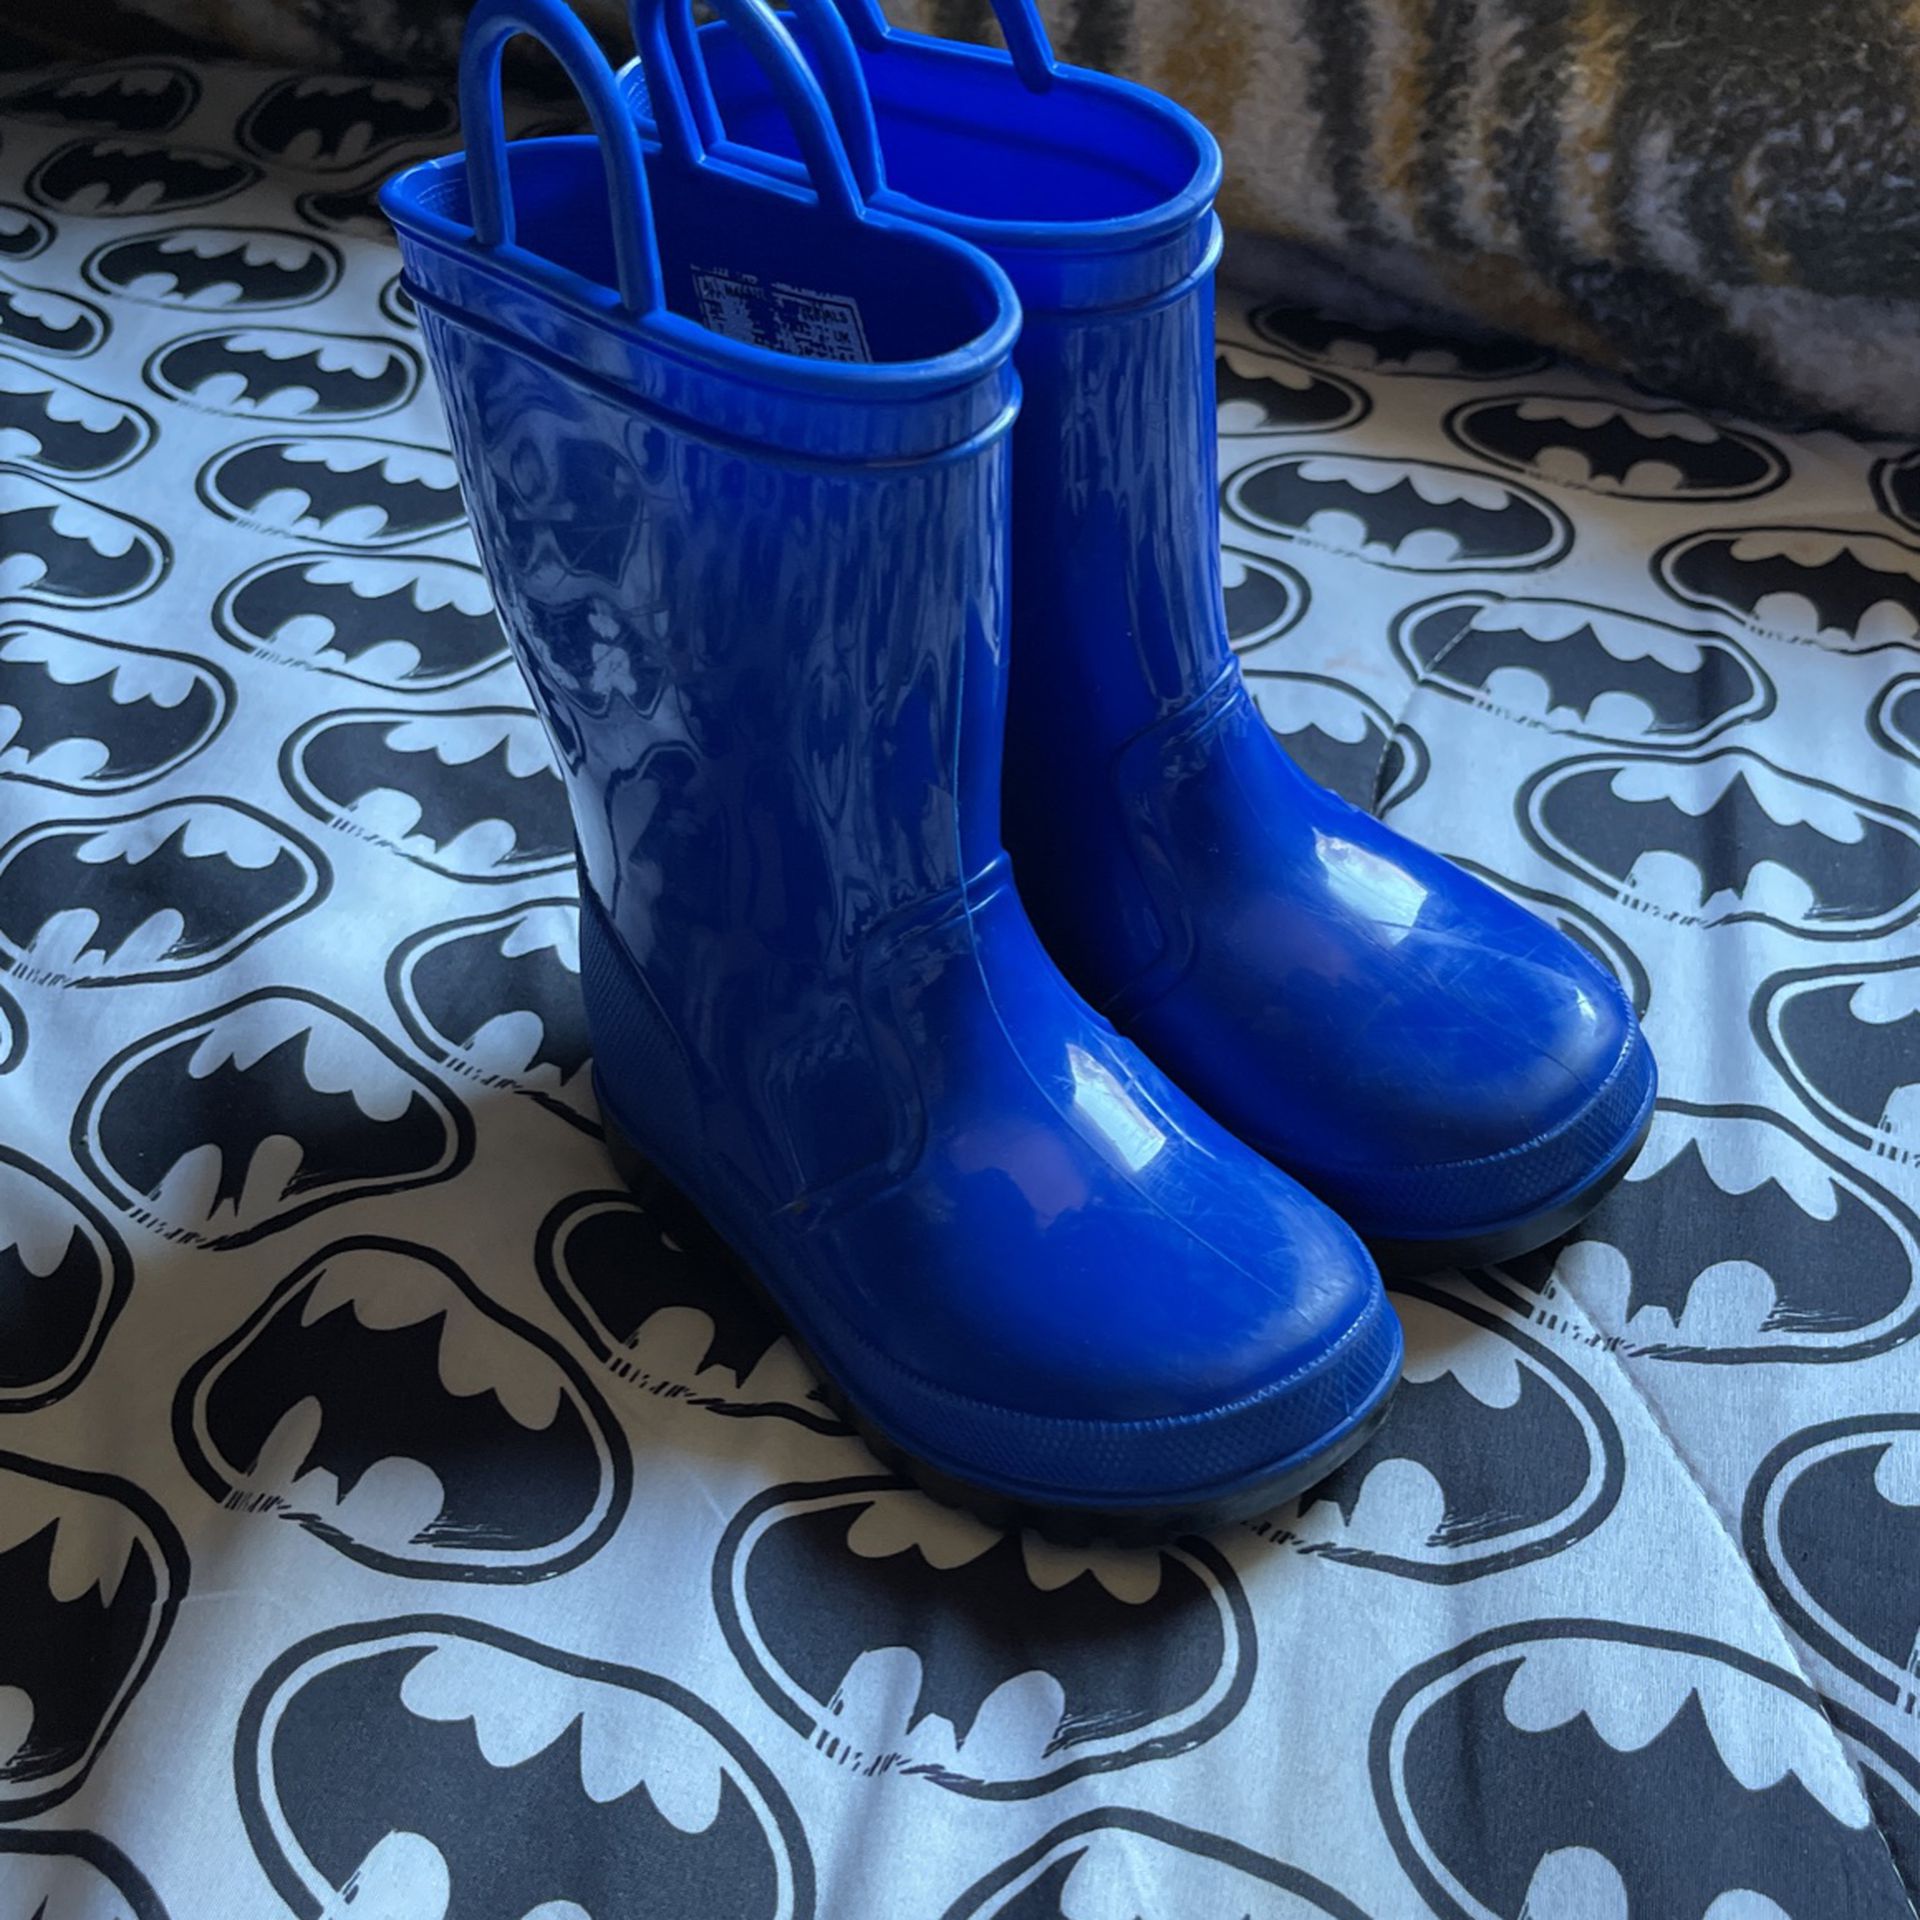 Toddler Rain Boots Size 7($5)